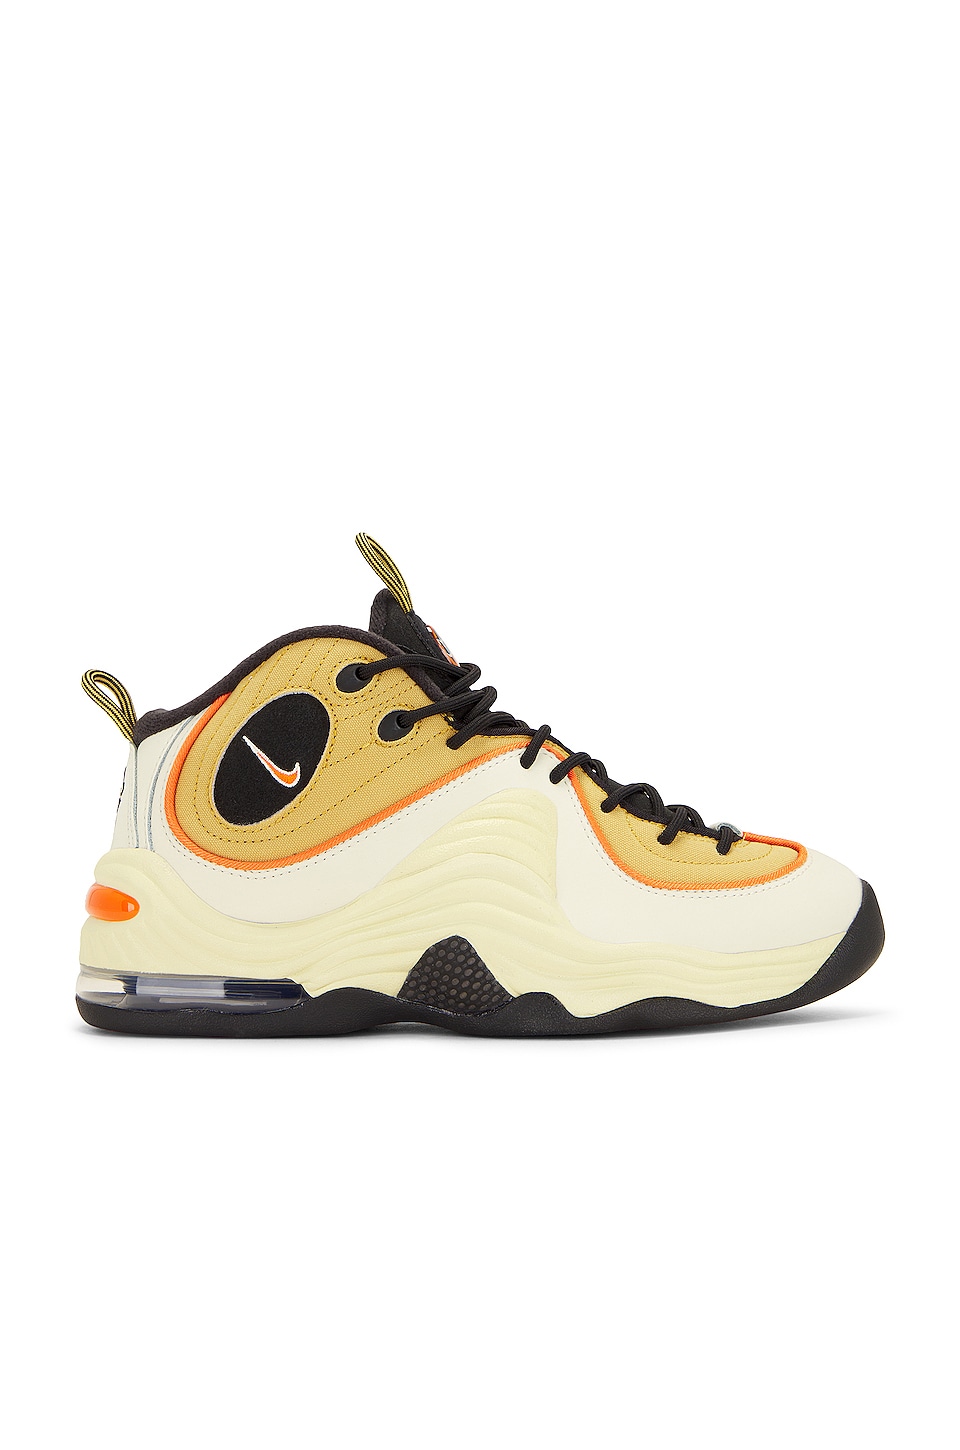 Nike Air Penny Ii in Wheat Gold, Safety Orange & Black | REVOLVE